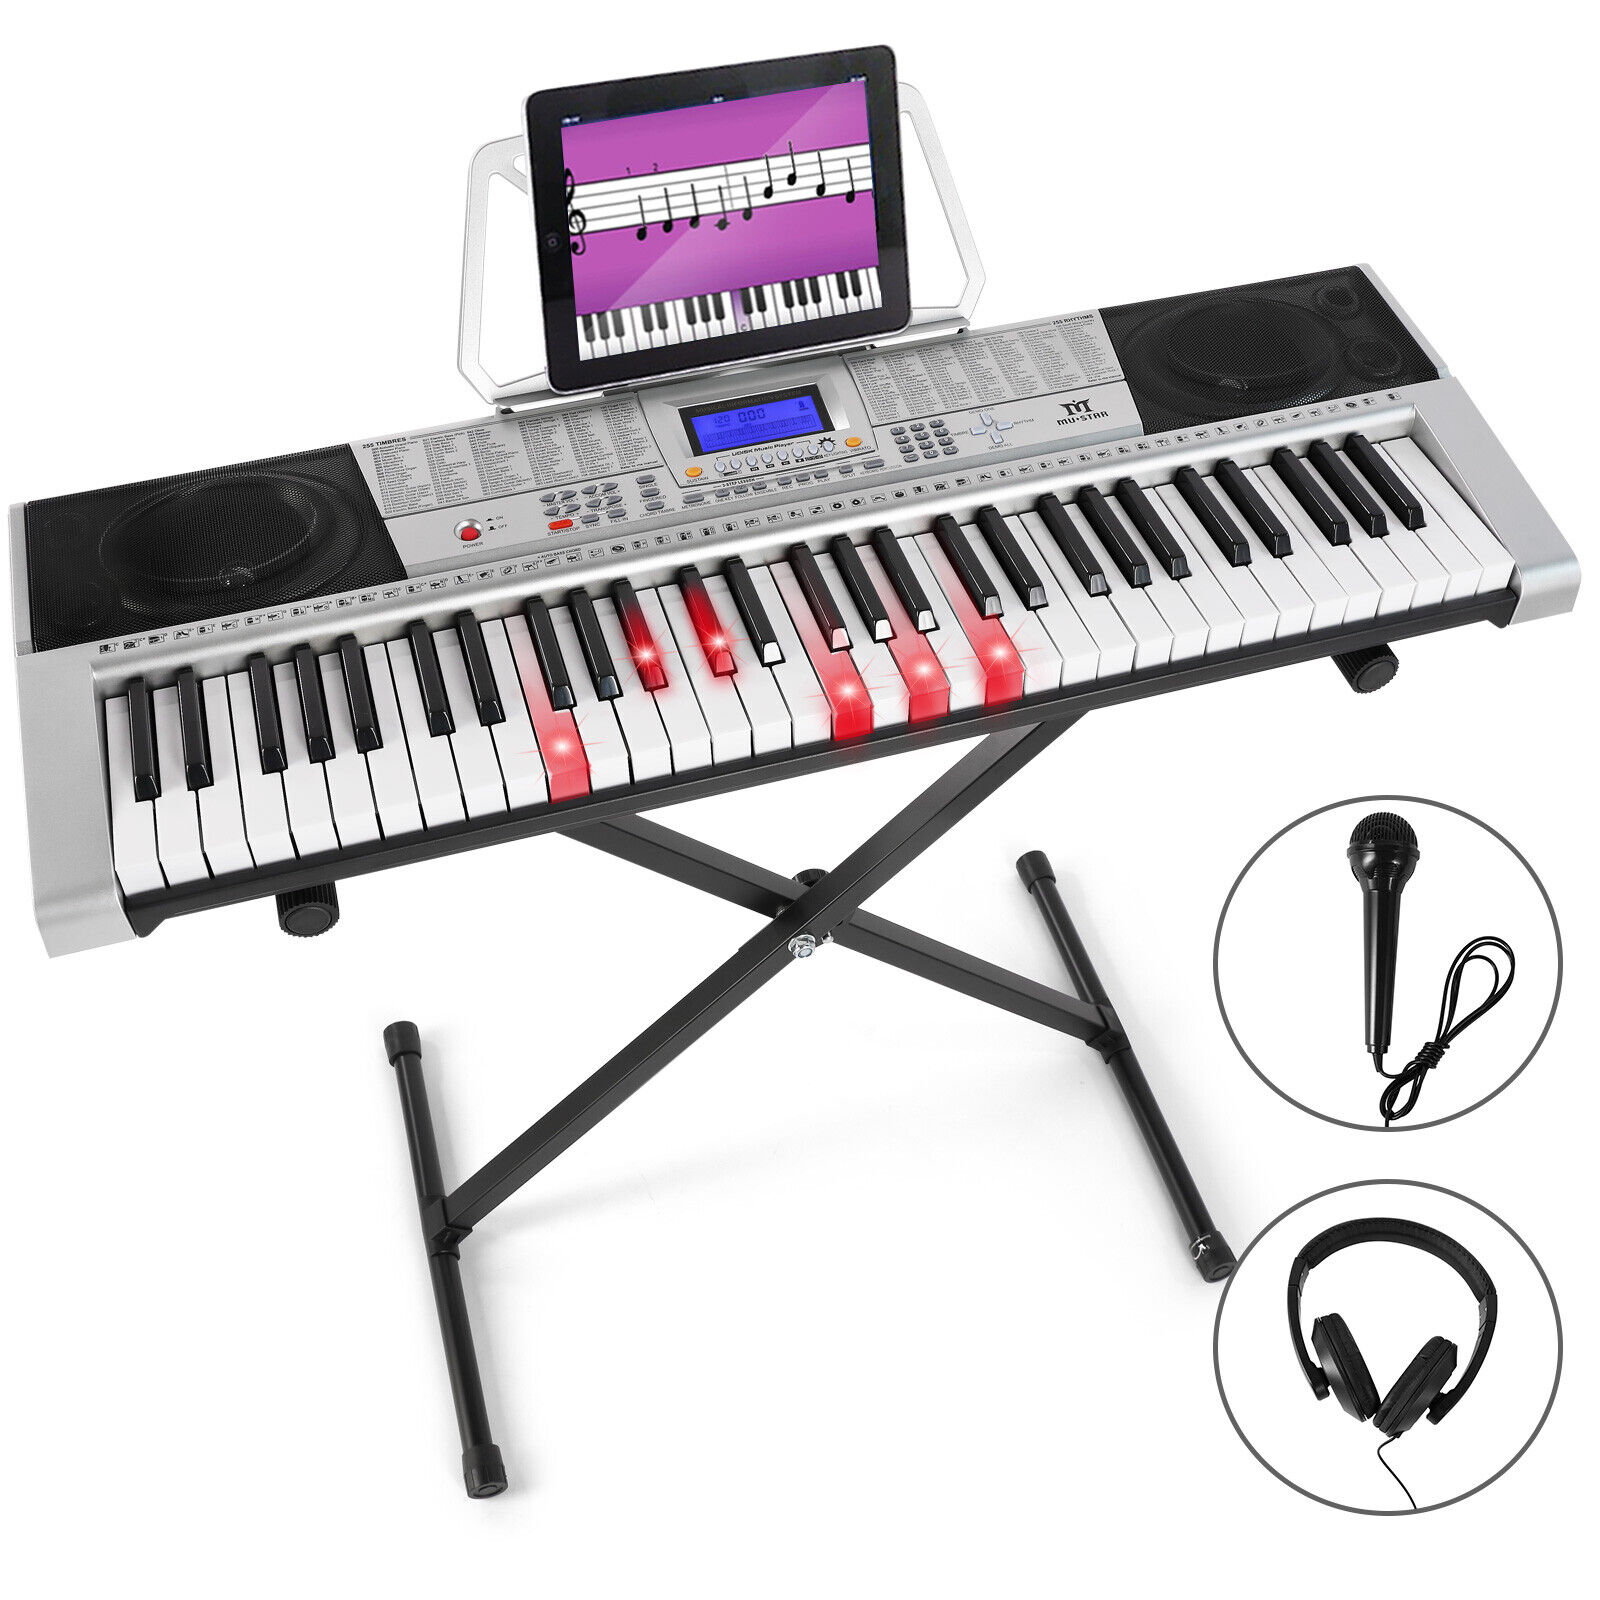 Portable 61Key Electronic Lighted Keyboard Piano LCD Screen Headphone Microphone Mustar S6010400